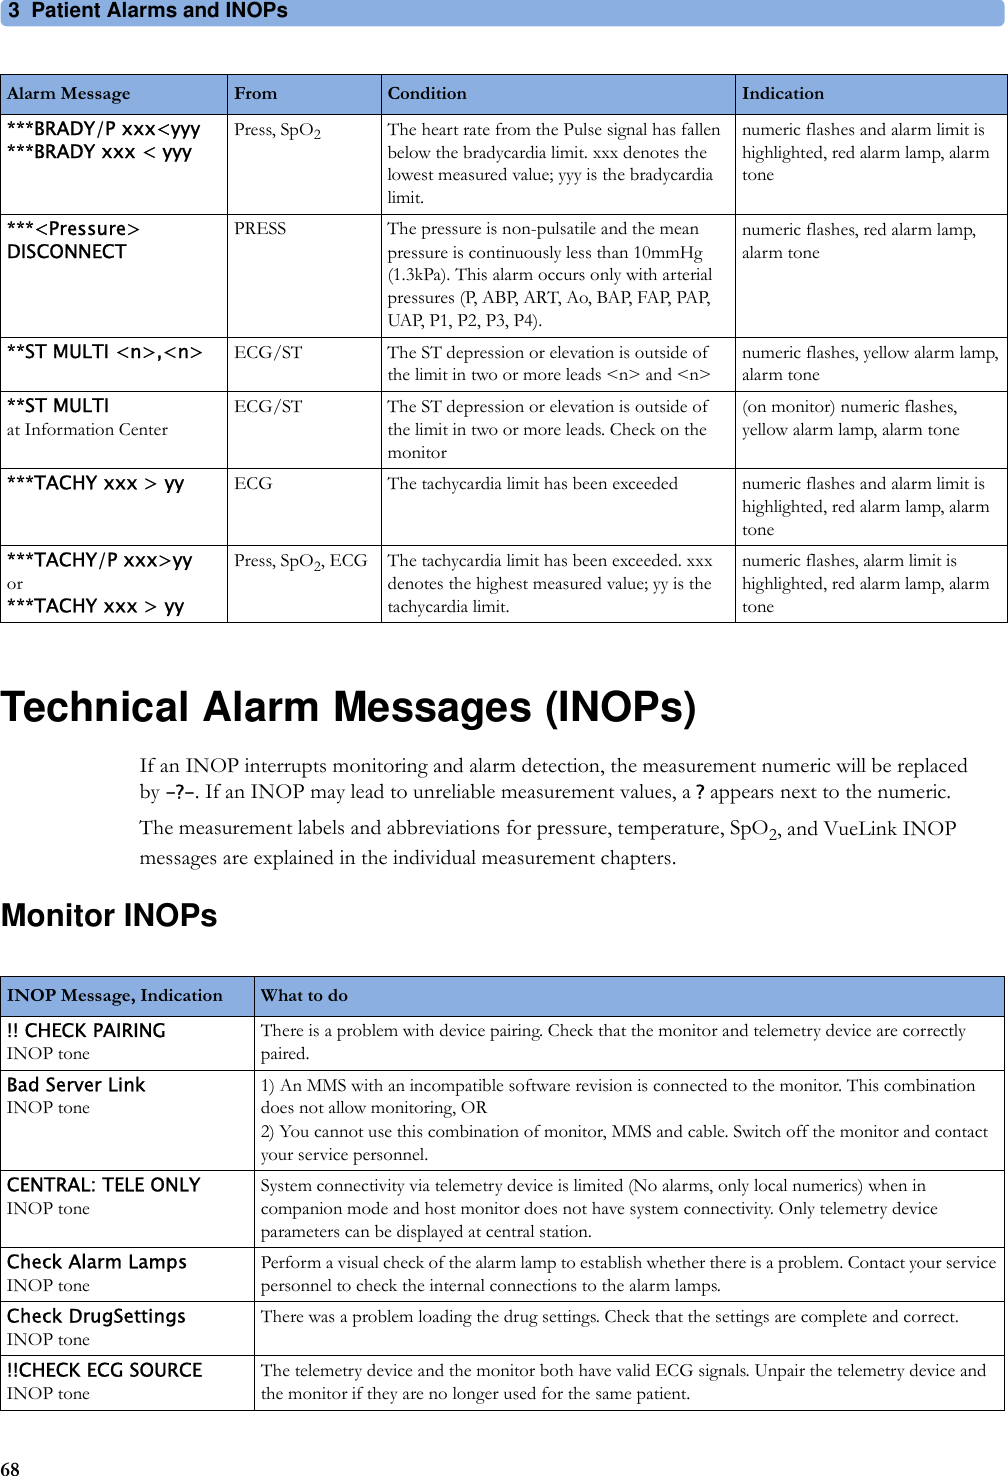 3 Patient Alarms and INOPs68Technical Alarm Messages (INOPs)If an INOP interrupts monitoring and alarm detection, the measurement numeric will be replaced by -?-. If an INOP may lead to unreliable measurement values, a ?appears next to the numeric.The measurement labels and abbreviations for pressure, temperature, SpO2, and VueLink INOP messages are explained in the individual measurement chapters.Monitor INOPs***BRADY/P xxx&lt;yyy***BRADY xxx &lt; yyyPress, SpO2The heart rate from the Pulse signal has fallen below the bradycardia limit. xxx denotes the lowest measured value; yyy is the bradycardia limit.numeric flashes and alarm limit is highlighted, red alarm lamp, alarm tone***&lt;Pressure&gt; DISCONNECTPRESS The pressure is non-pulsatile and the mean pressure is continuously less than 10mmHg (1.3kPa). This alarm occurs only with arterial pressures (P, ABP, ART, Ao, BAP, FAP, PAP, UAP, P1, P2, P3, P4).numeric flashes, red alarm lamp, alarm tone**ST MULTI &lt;n&gt;,&lt;n&gt; ECG/ST The ST depression or elevation is outside of the limit in two or more leads &lt;n&gt; and &lt;n&gt;numeric flashes, yellow alarm lamp, alarm tone**ST MULTIat Information CenterECG/ST The ST depression or elevation is outside of the limit in two or more leads. Check on the monitor (on monitor) numeric flashes, yellow alarm lamp, alarm tone***TACHY xxx &gt; yy ECG The tachycardia limit has been exceeded numeric flashes and alarm limit is highlighted, red alarm lamp, alarm tone***TACHY/P xxx&gt;yyor***TACHY xxx &gt; yyPress, SpO2, ECG The tachycardia limit has been exceeded. xxx denotes the highest measured value; yy is the tachycardia limit.numeric flashes, alarm limit is highlighted, red alarm lamp, alarm toneAlarm Message From Condition IndicationINOP Message, Indication What to do !! CHECK PAIRINGINOP toneThere is a problem with device pairing. Check that the monitor and telemetry device are correctly paired.Bad Server LinkINOP tone1) An MMS with an incompatible software revision is connected to the monitor. This combination does not allow monitoring, OR 2) You cannot use this combination of monitor, MMS and cable. Switch off the monitor and contact your service personnel.CENTRAL: TELE ONLYINOP toneSystem connectivity via telemetry device is limited (No alarms, only local numerics) when in companion mode and host monitor does not have system connectivity. Only telemetry device parameters can be displayed at central station.Check Alarm LampsINOP tonePerform a visual check of the alarm lamp to establish whether there is a problem. Contact your service personnel to check the internal connections to the alarm lamps.Check DrugSettingsINOP toneThere was a problem loading the drug settings. Check that the settings are complete and correct.!!CHECK ECG SOURCEINOP toneThe telemetry device and the monitor both have valid ECG signals. Unpair the telemetry device and the monitor if they are no longer used for the same patient.